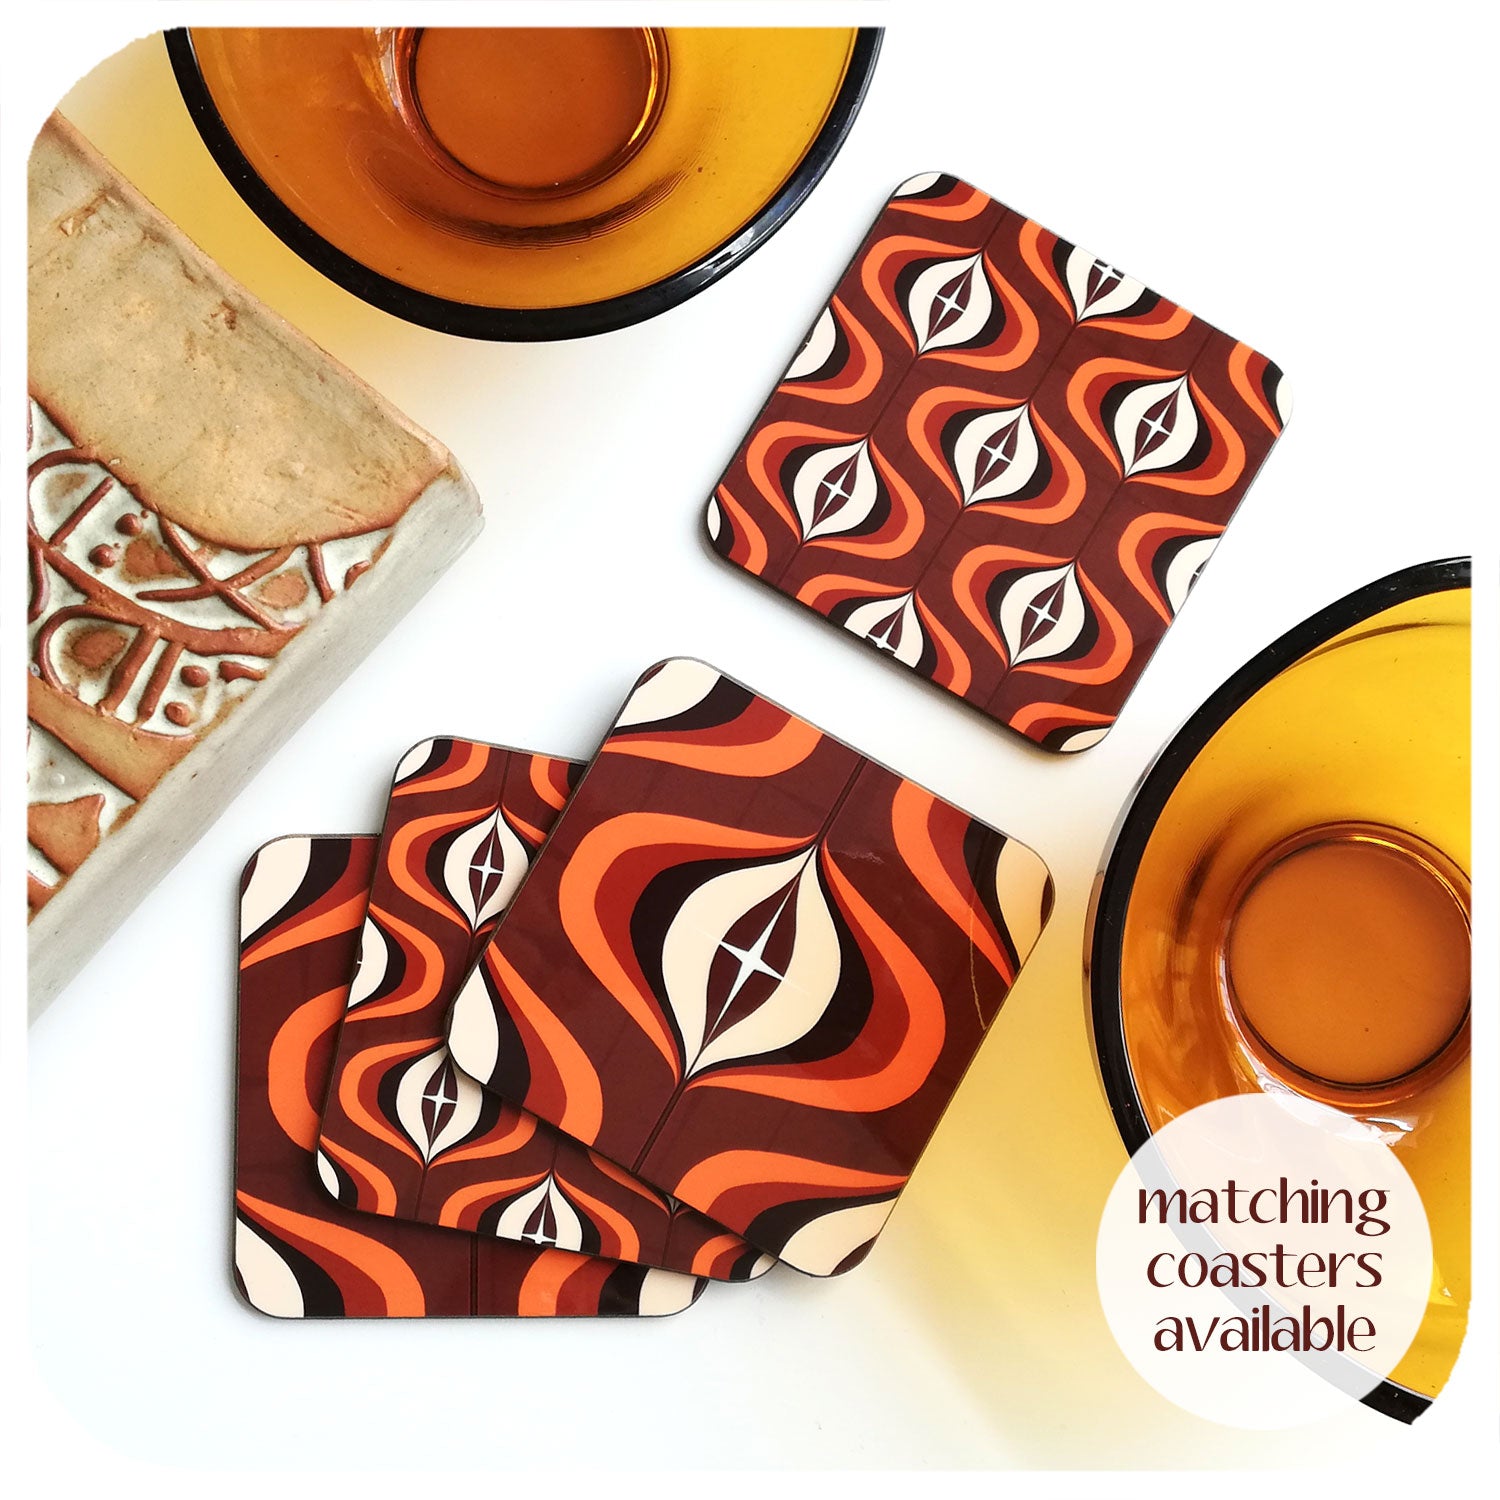 1970s Op Art Coasters in Brown and Orange with vintage vase and bowls | The Inkabilly Emporium